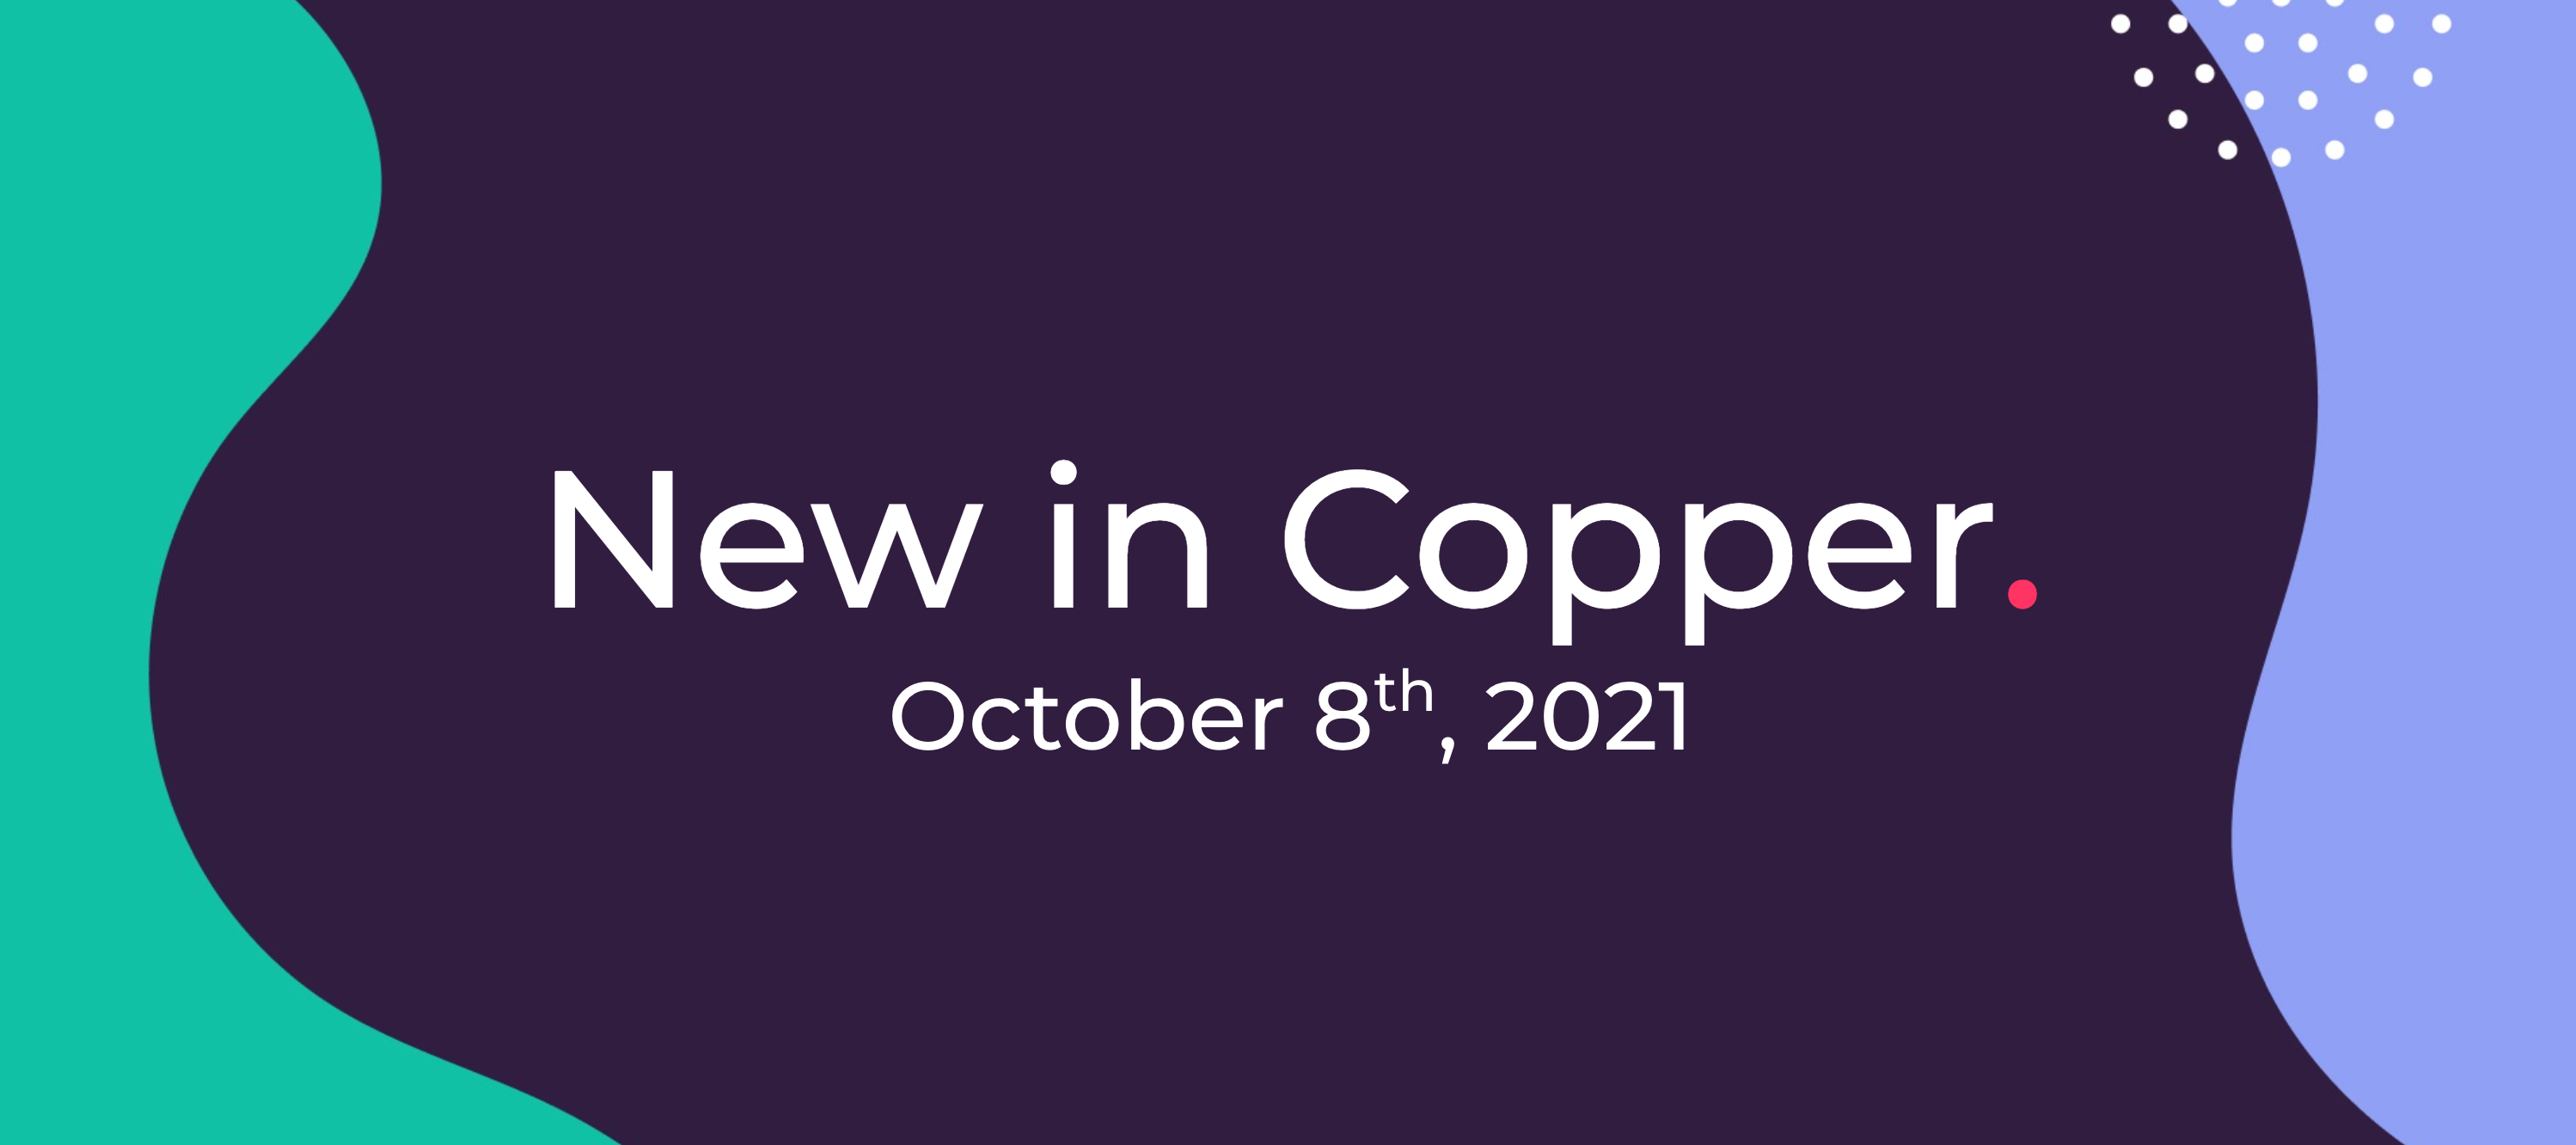 October 8th 2021 - New in Copper